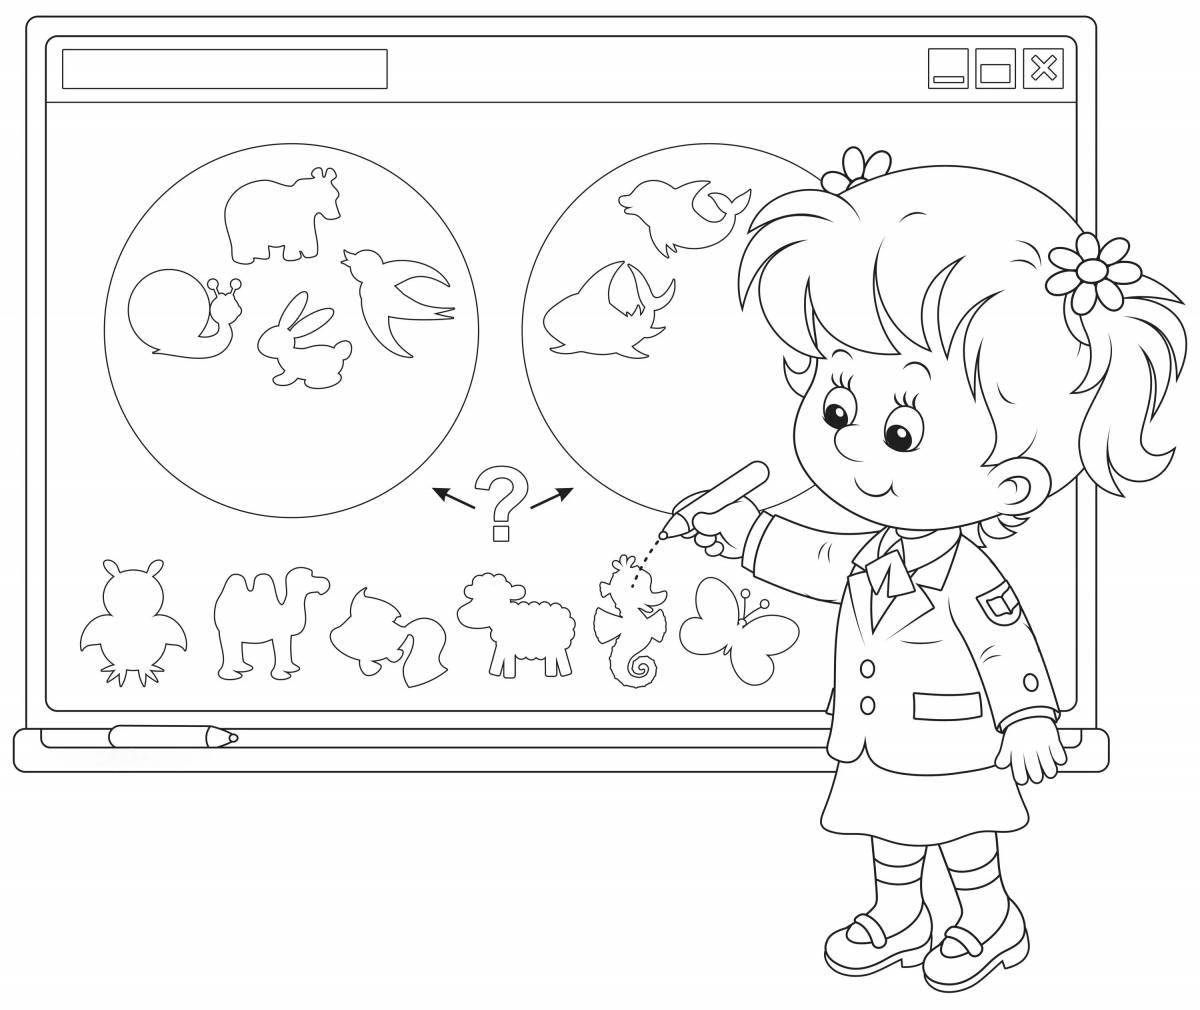 Colorful curiosity coloring page when learning is fun